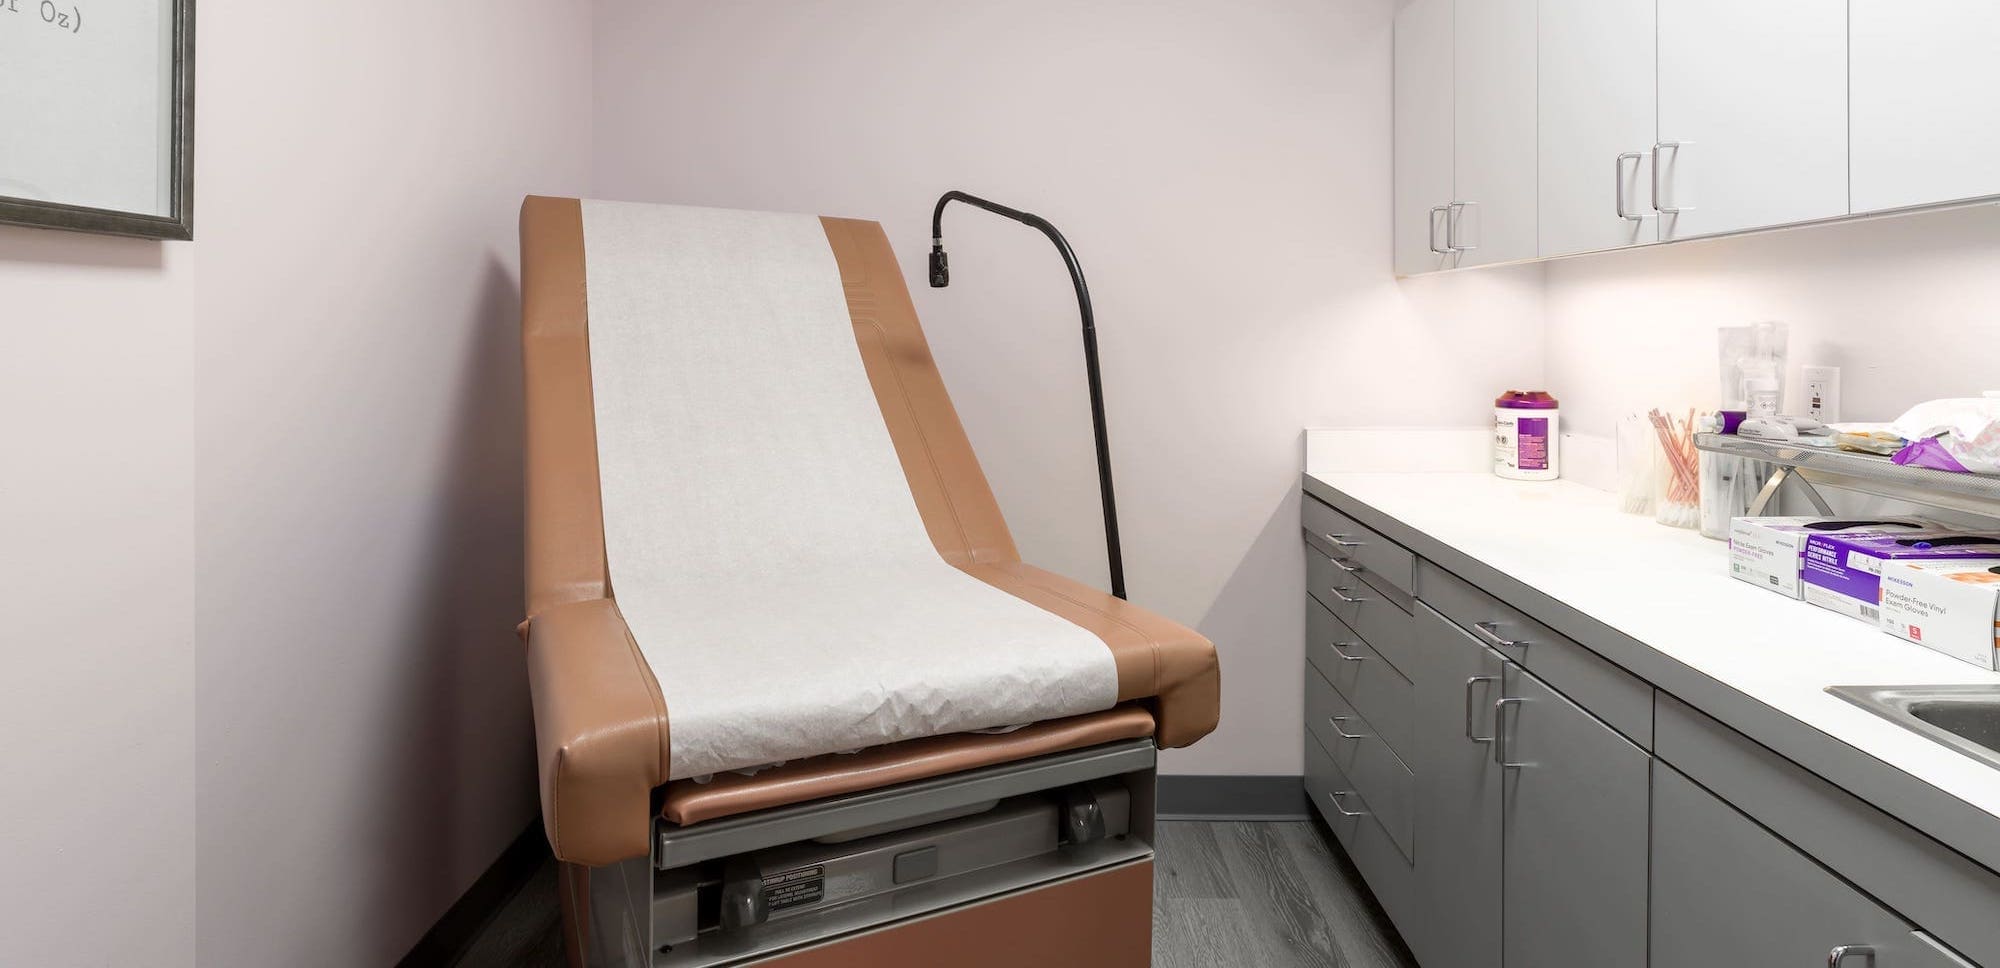 Treatment room two